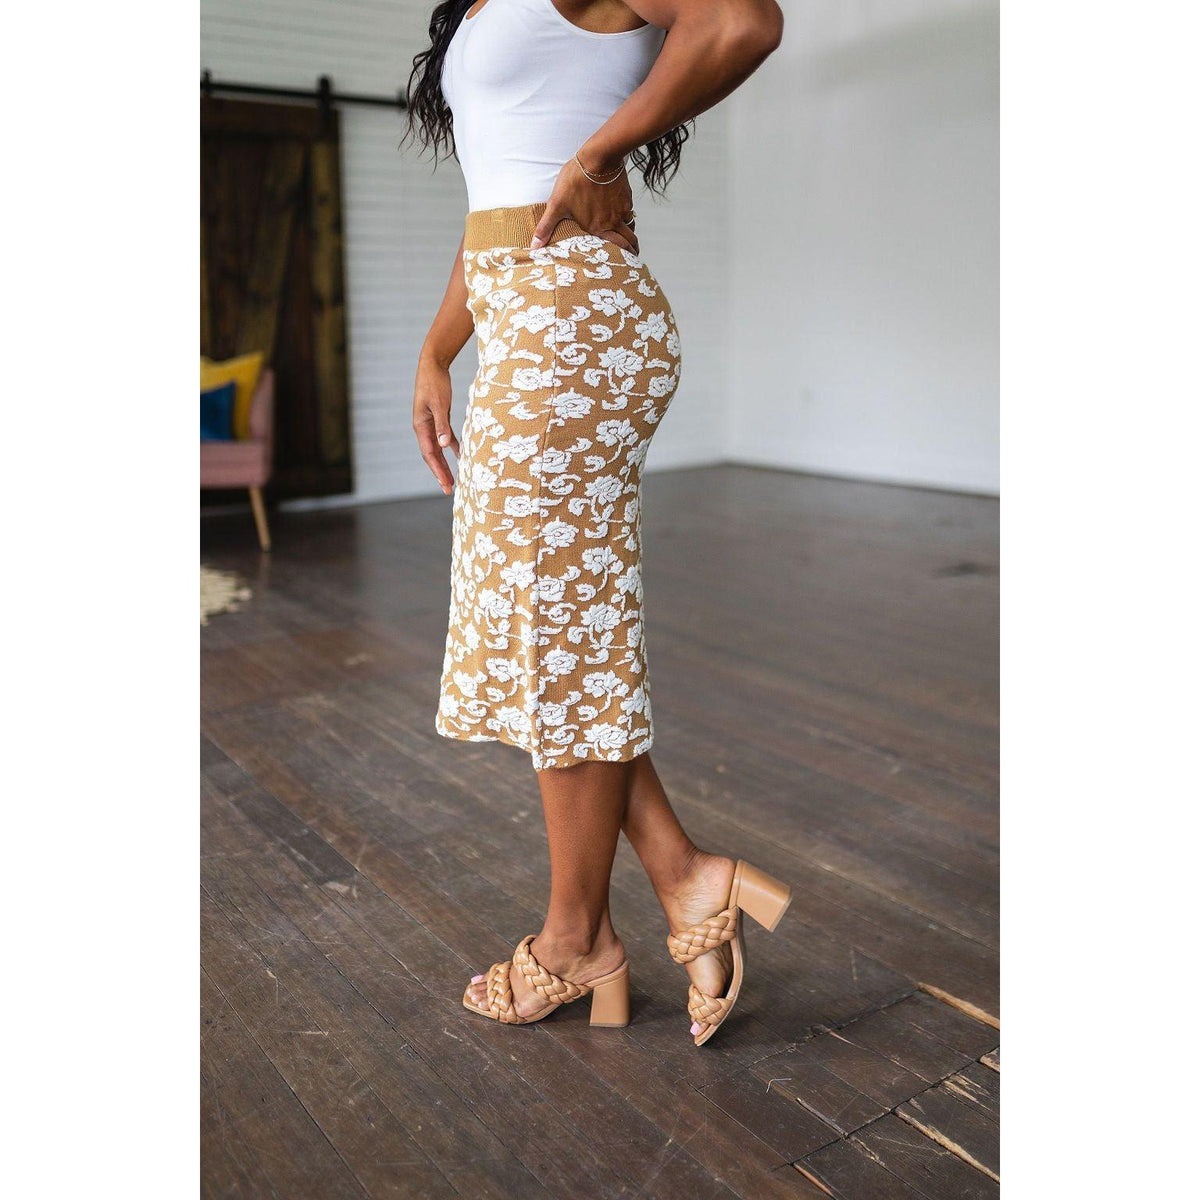 Kiss From a Rose Knit Pencil Skirt - becauseofadi